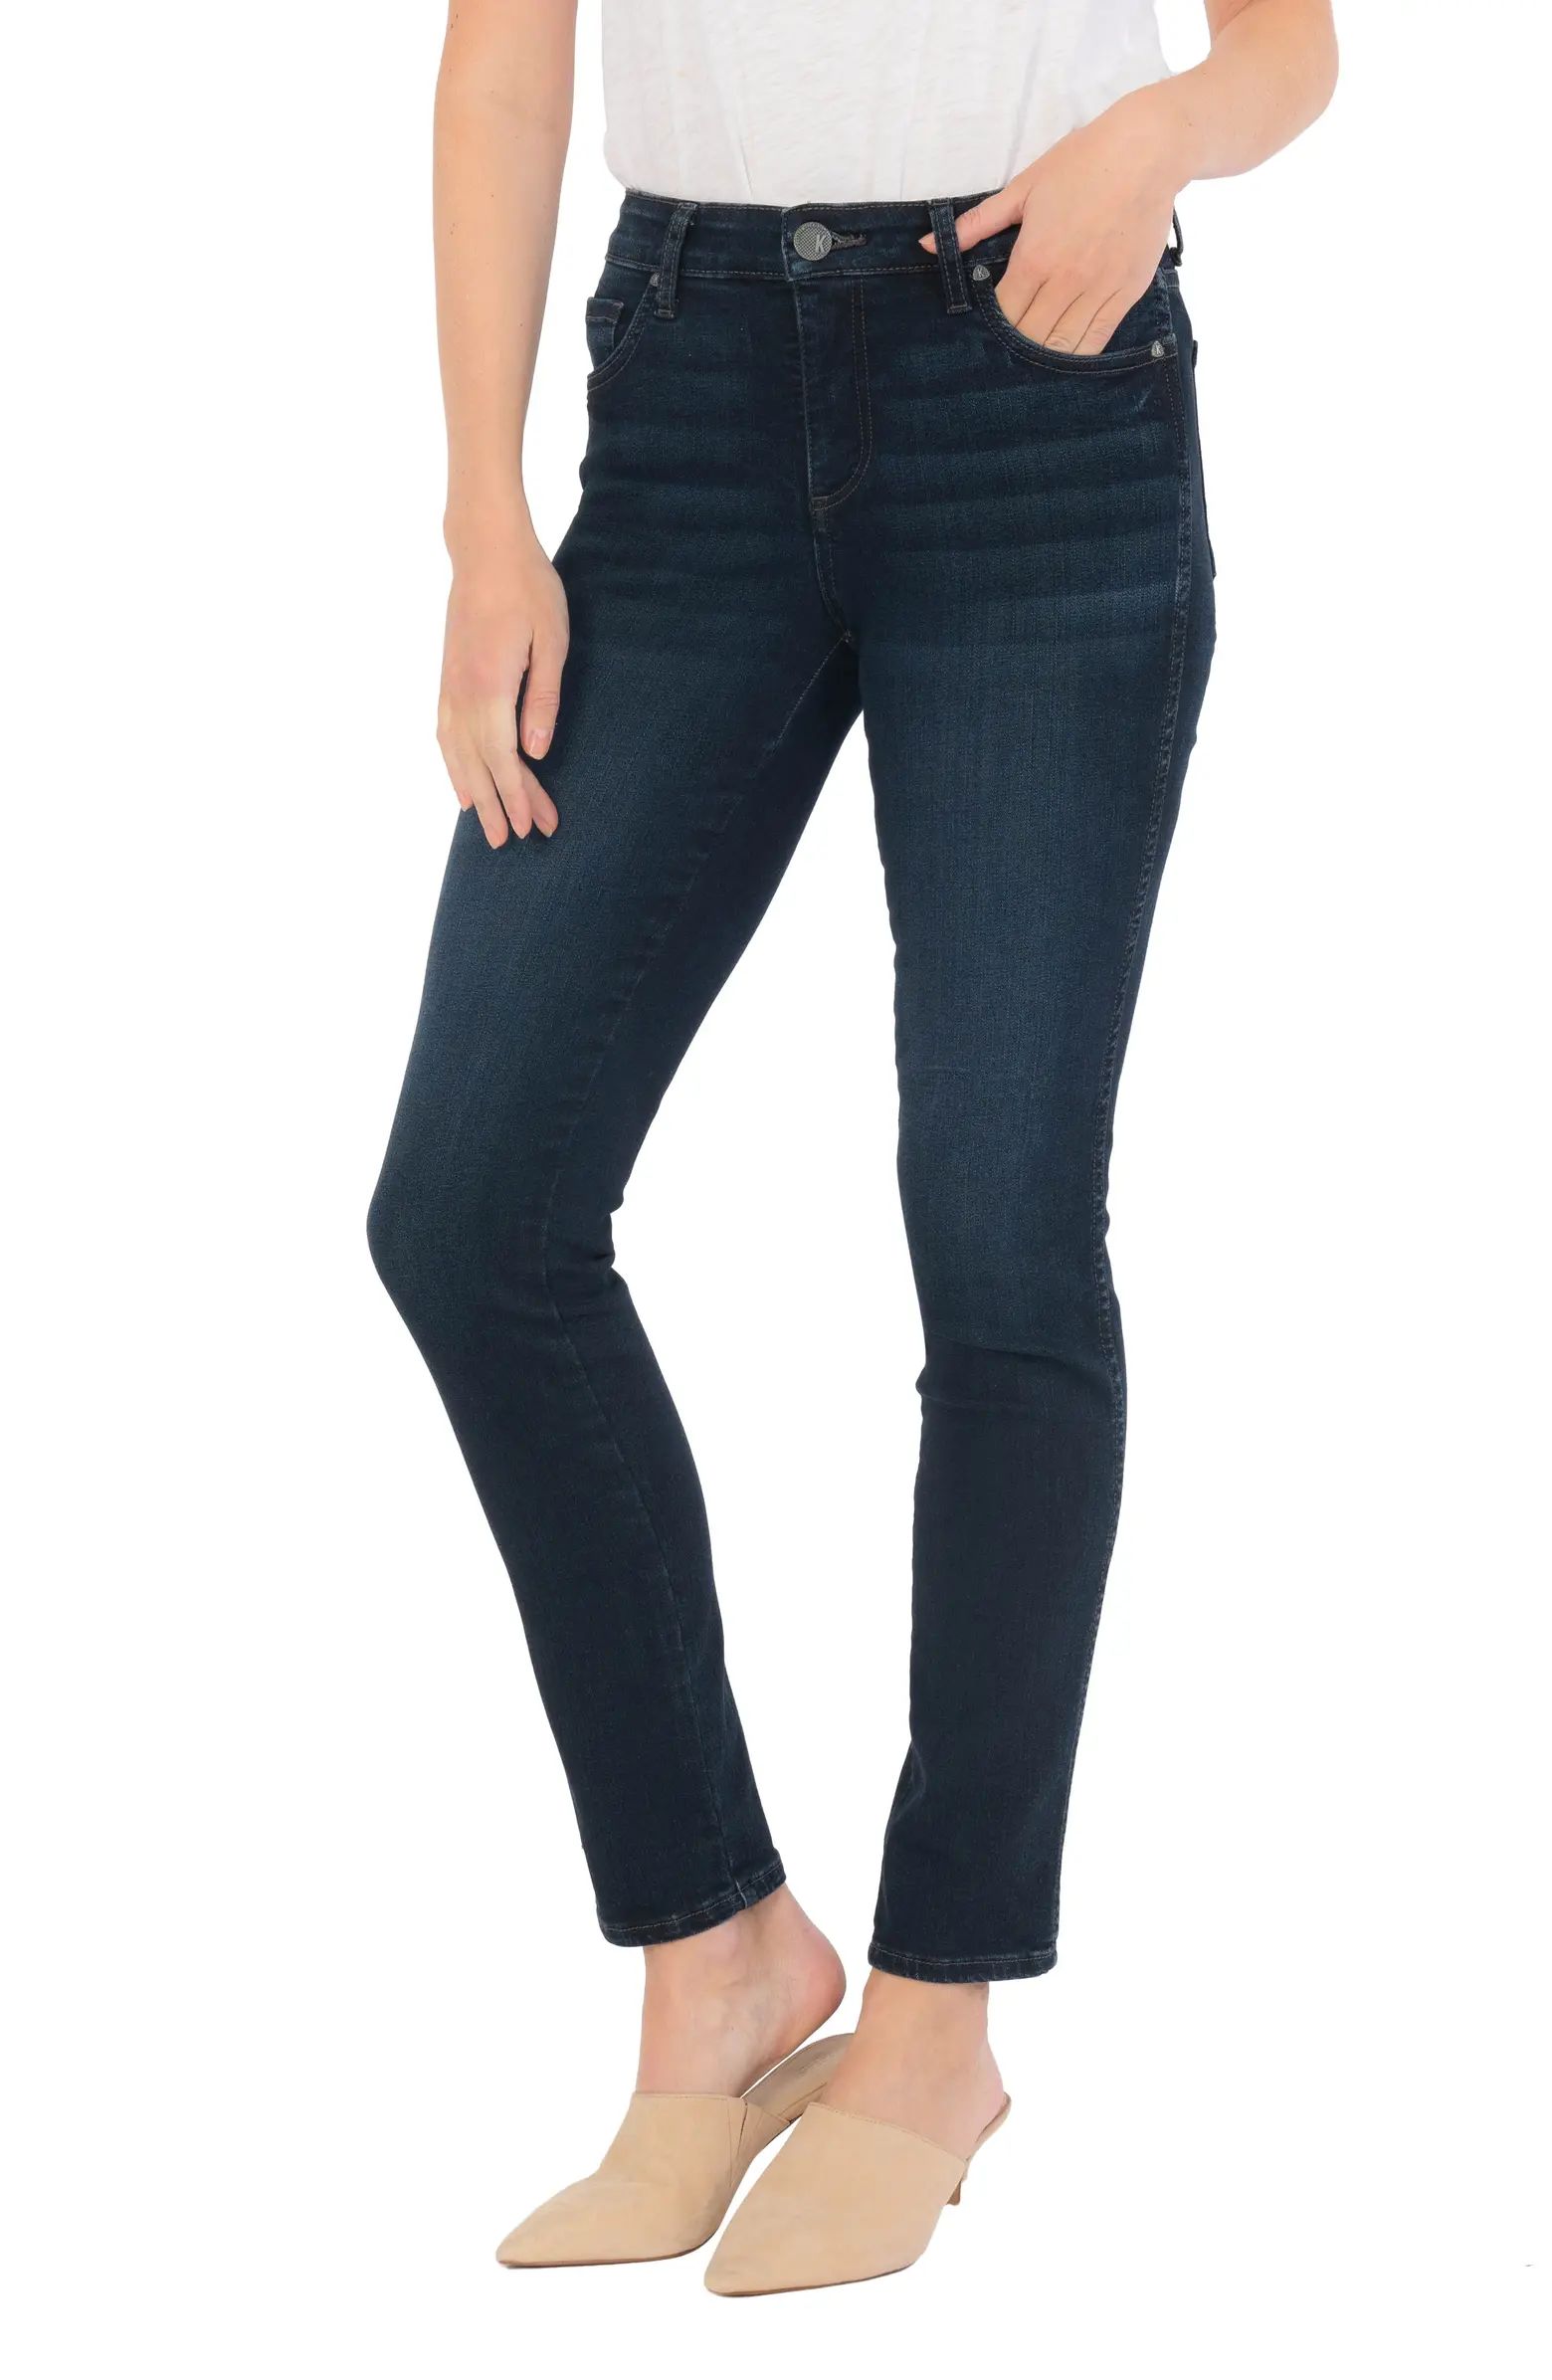 Diana Ab Fab High Waist Relaxed Skinny Jeans | Nordstrom